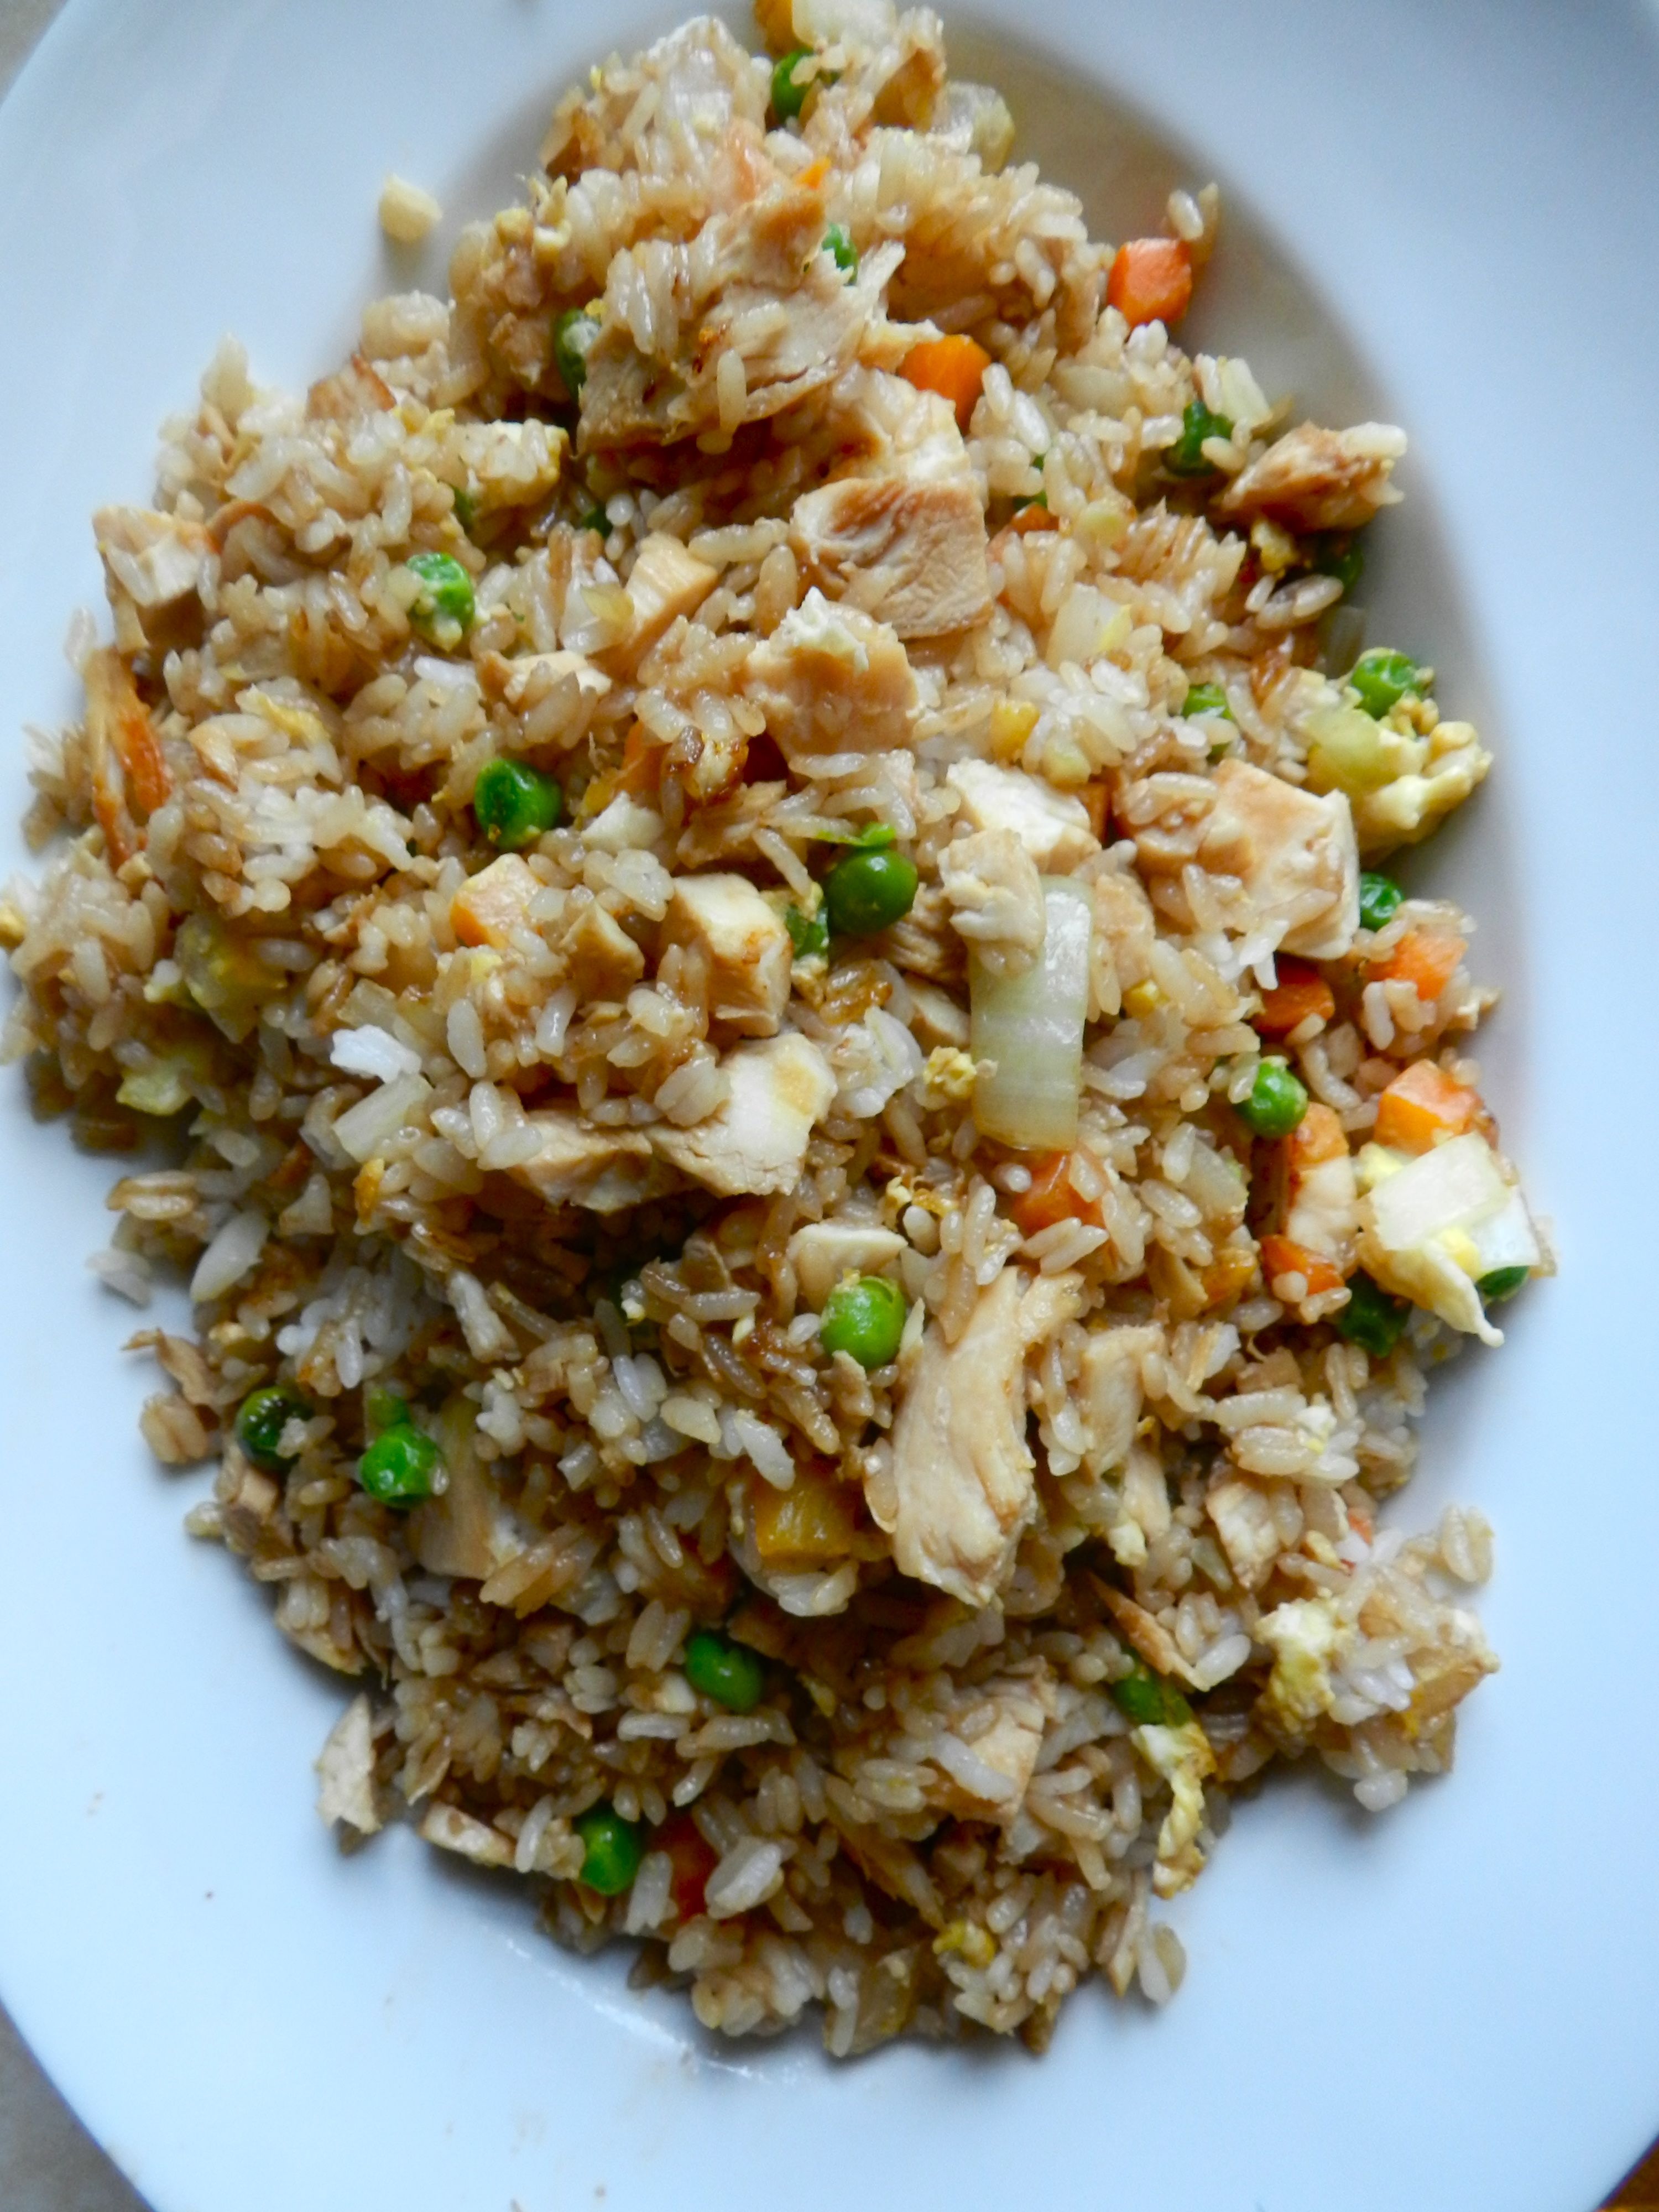 "Better-than-takeout chicken fried rice" Homemade, plus no yucky msg. 